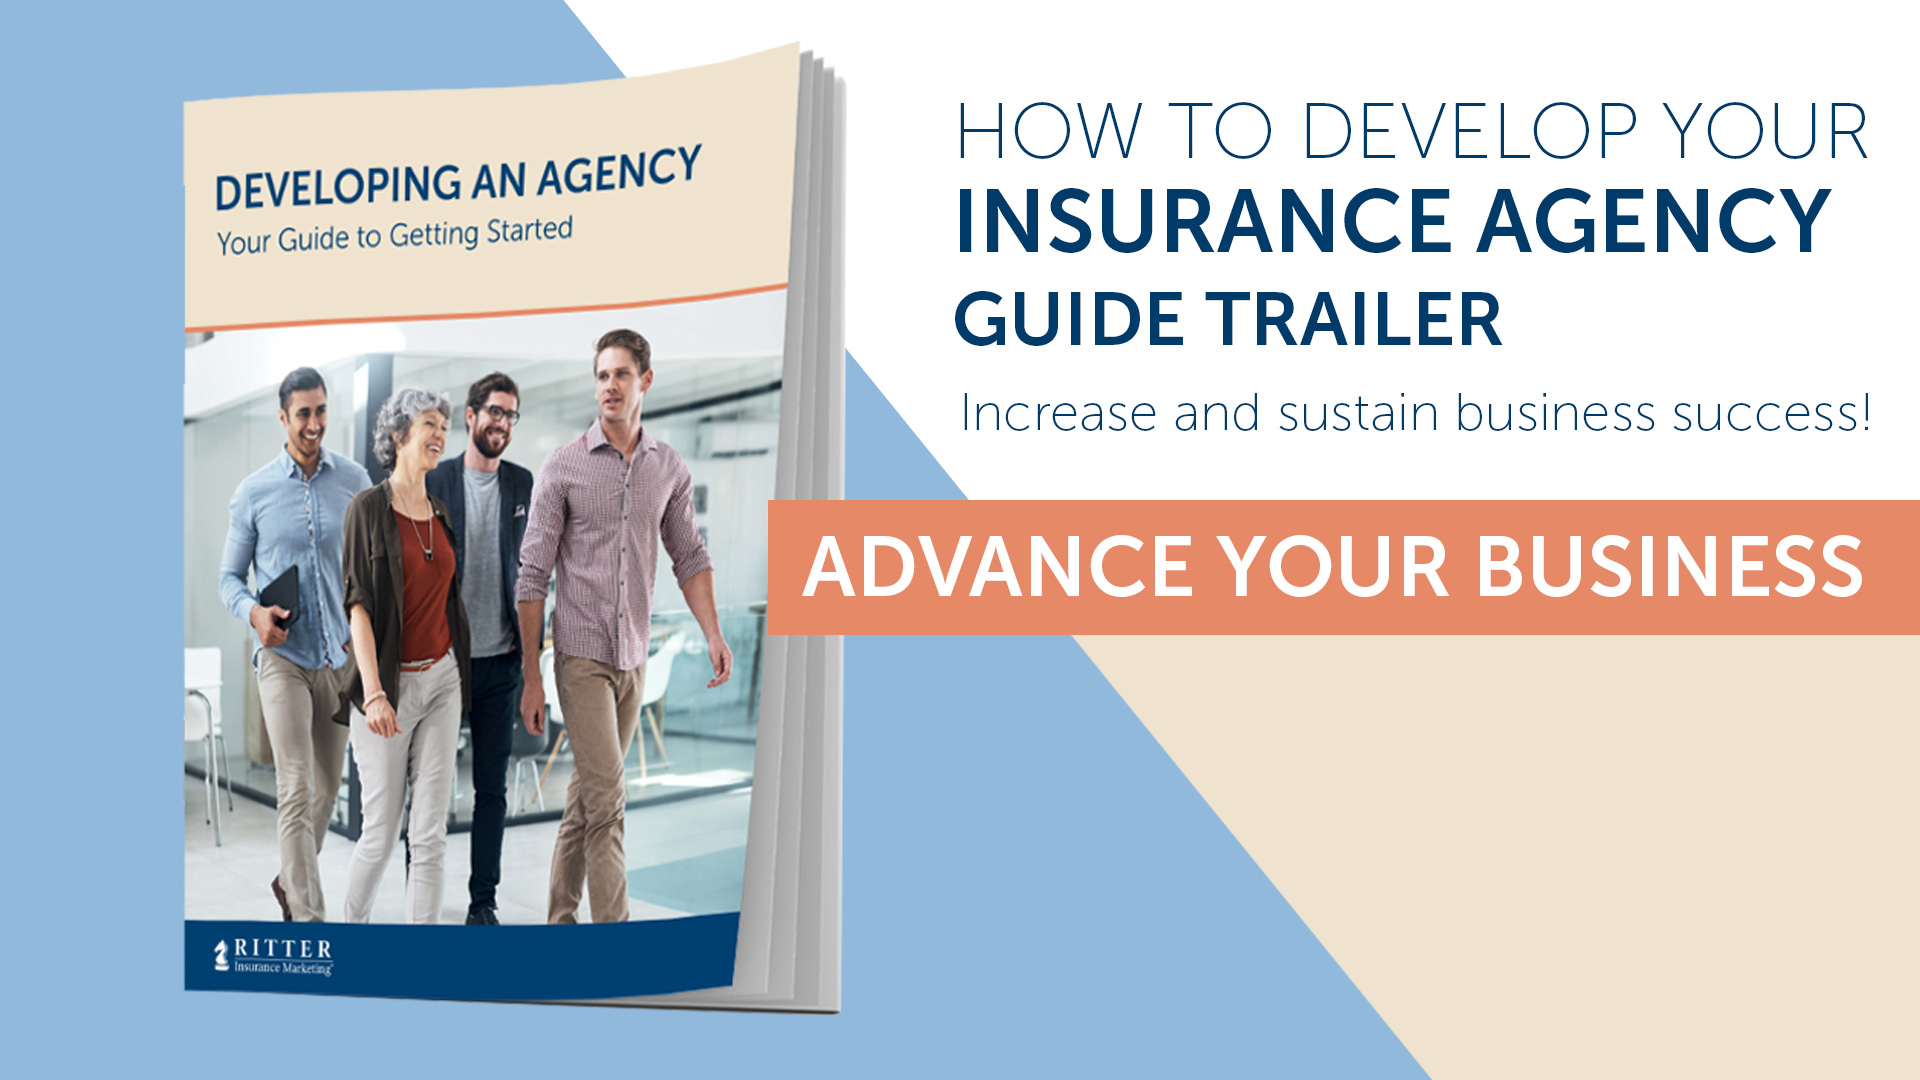 The Complete Guide on Developing an Agency